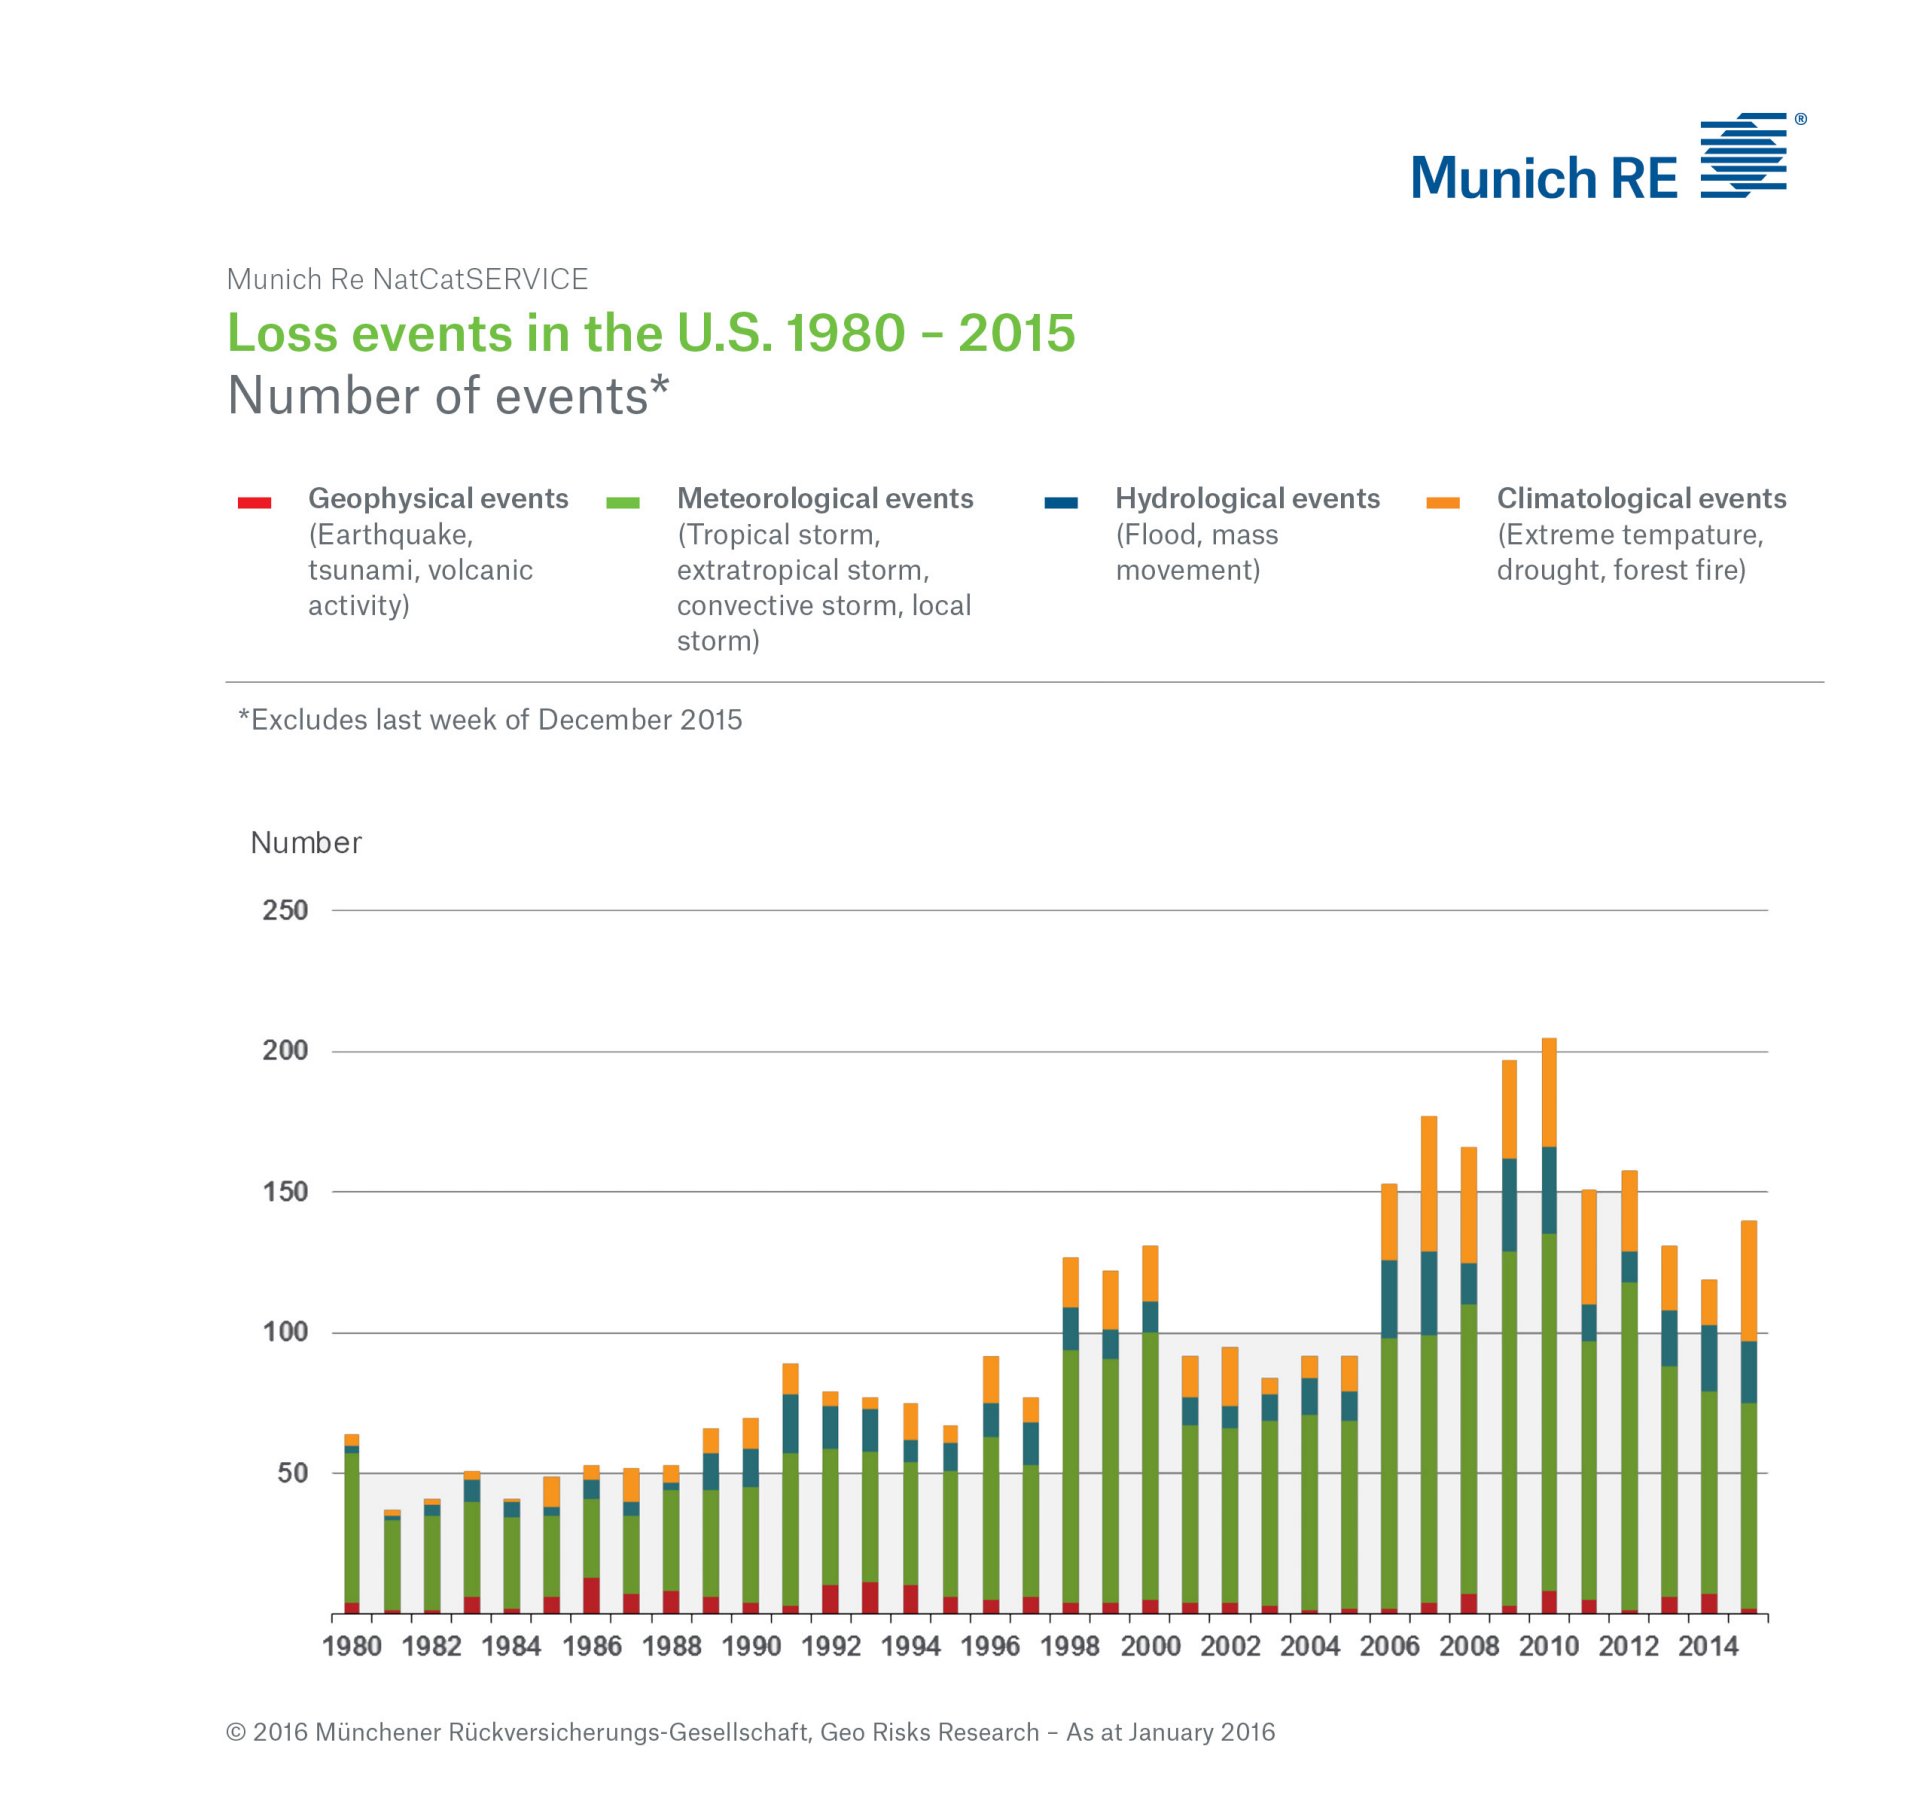 Loss events in the U.S. 1980 - 2015